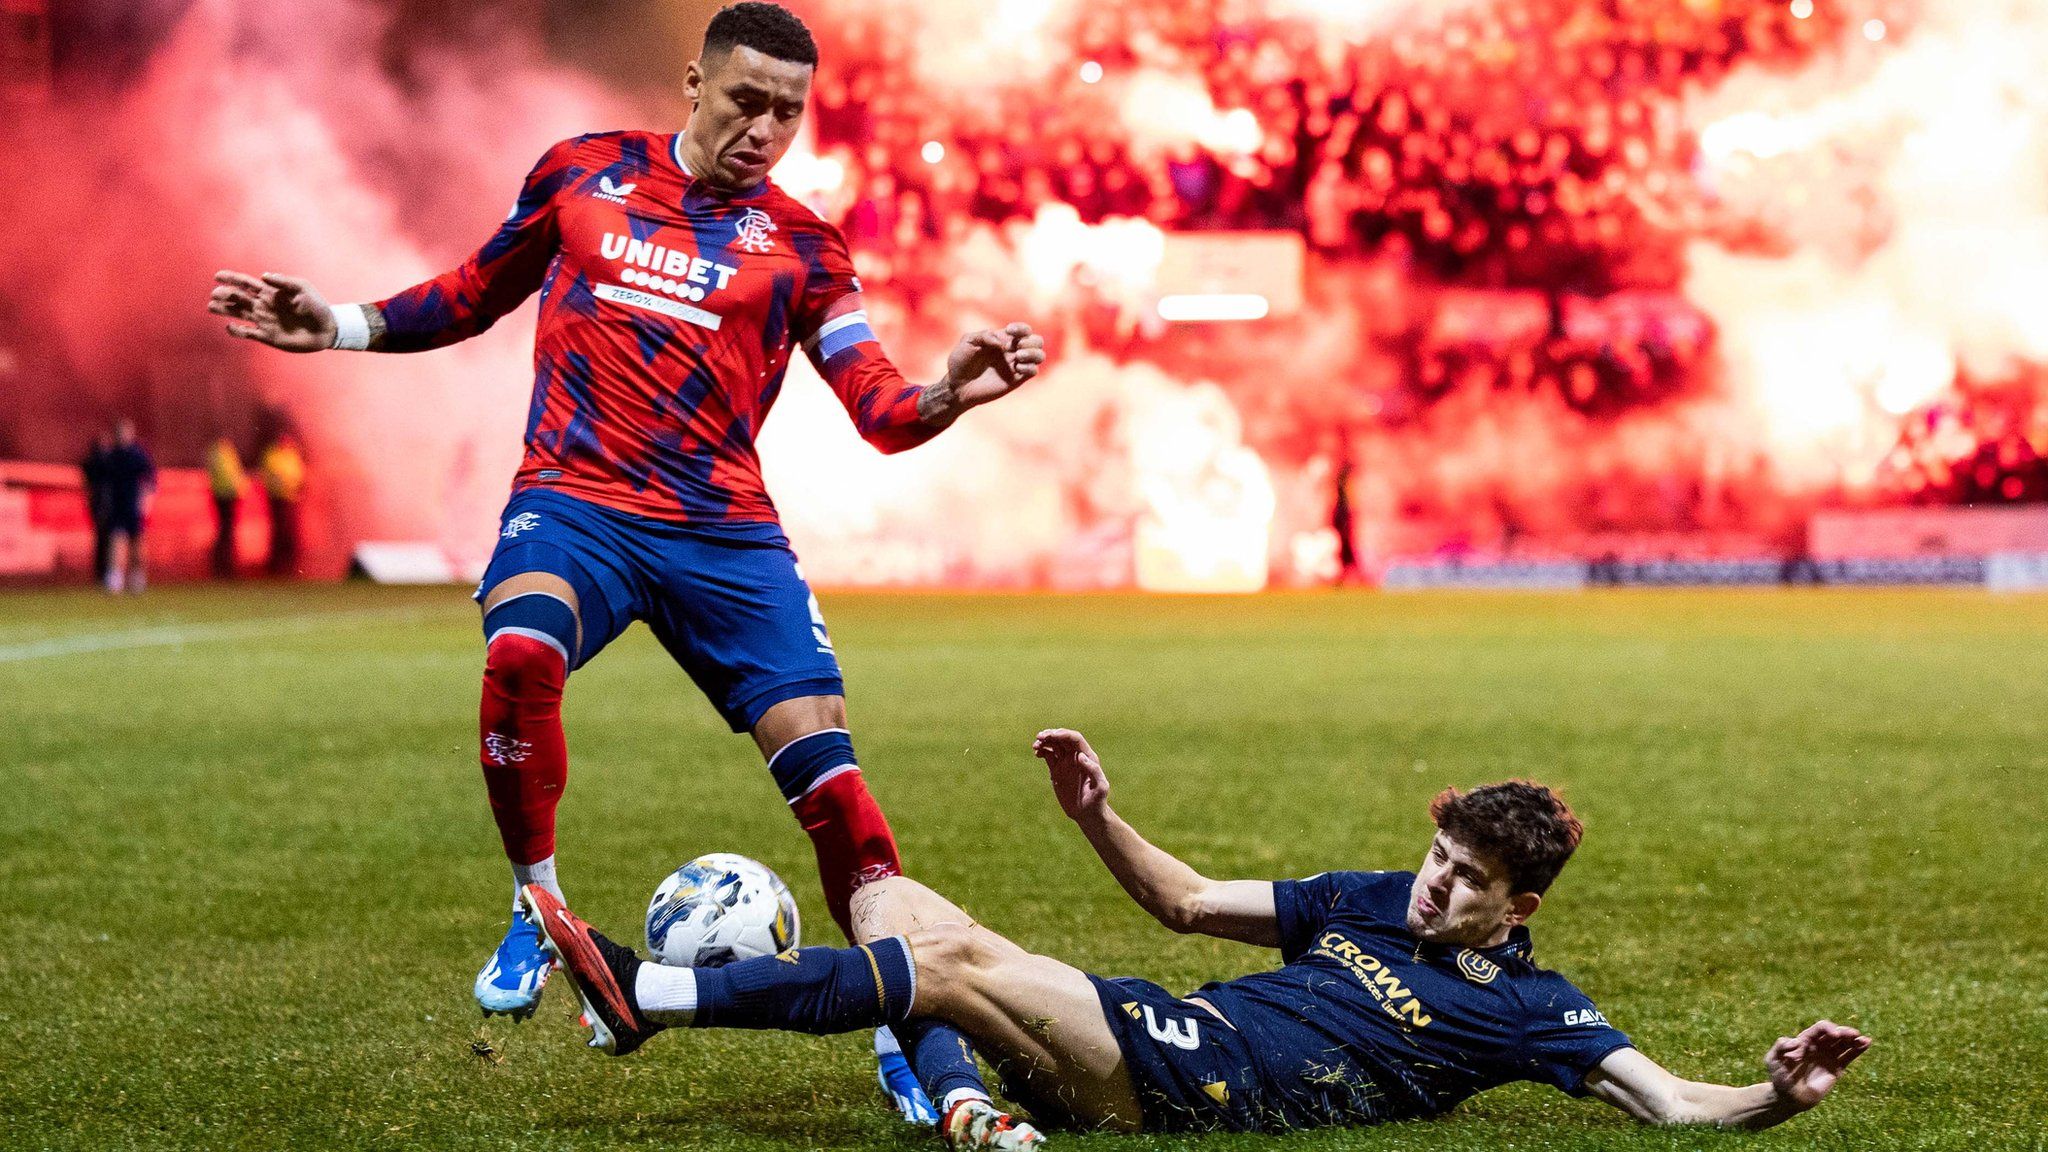 Rangers captain James Tavernier and Dundee player Owen Beck on the pitch as pyrotechnics go off in the background